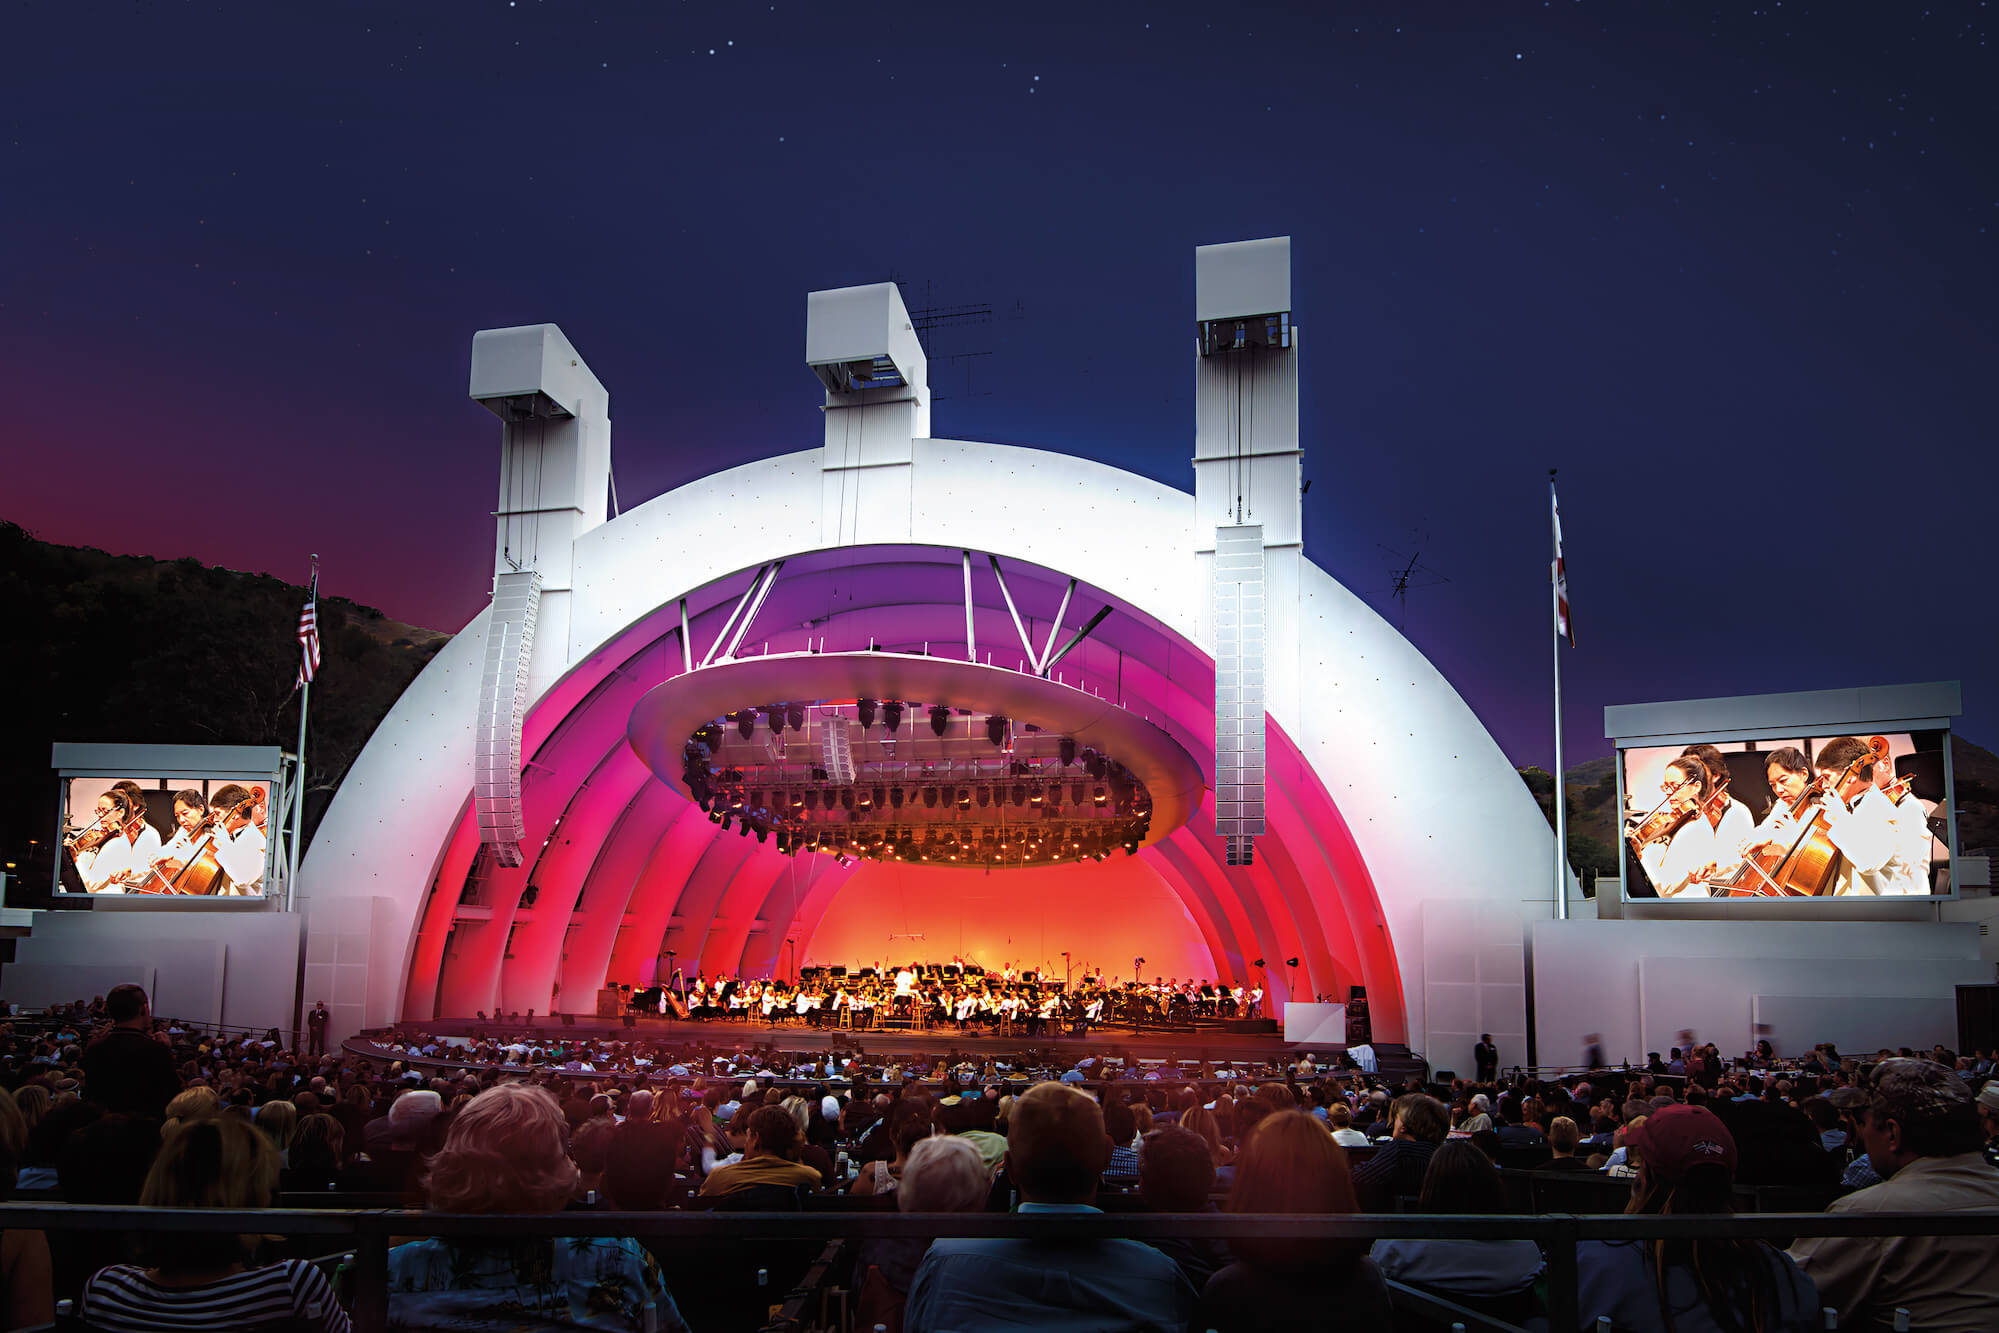 Hollywood Bowl stage during a performance by an orchestra.